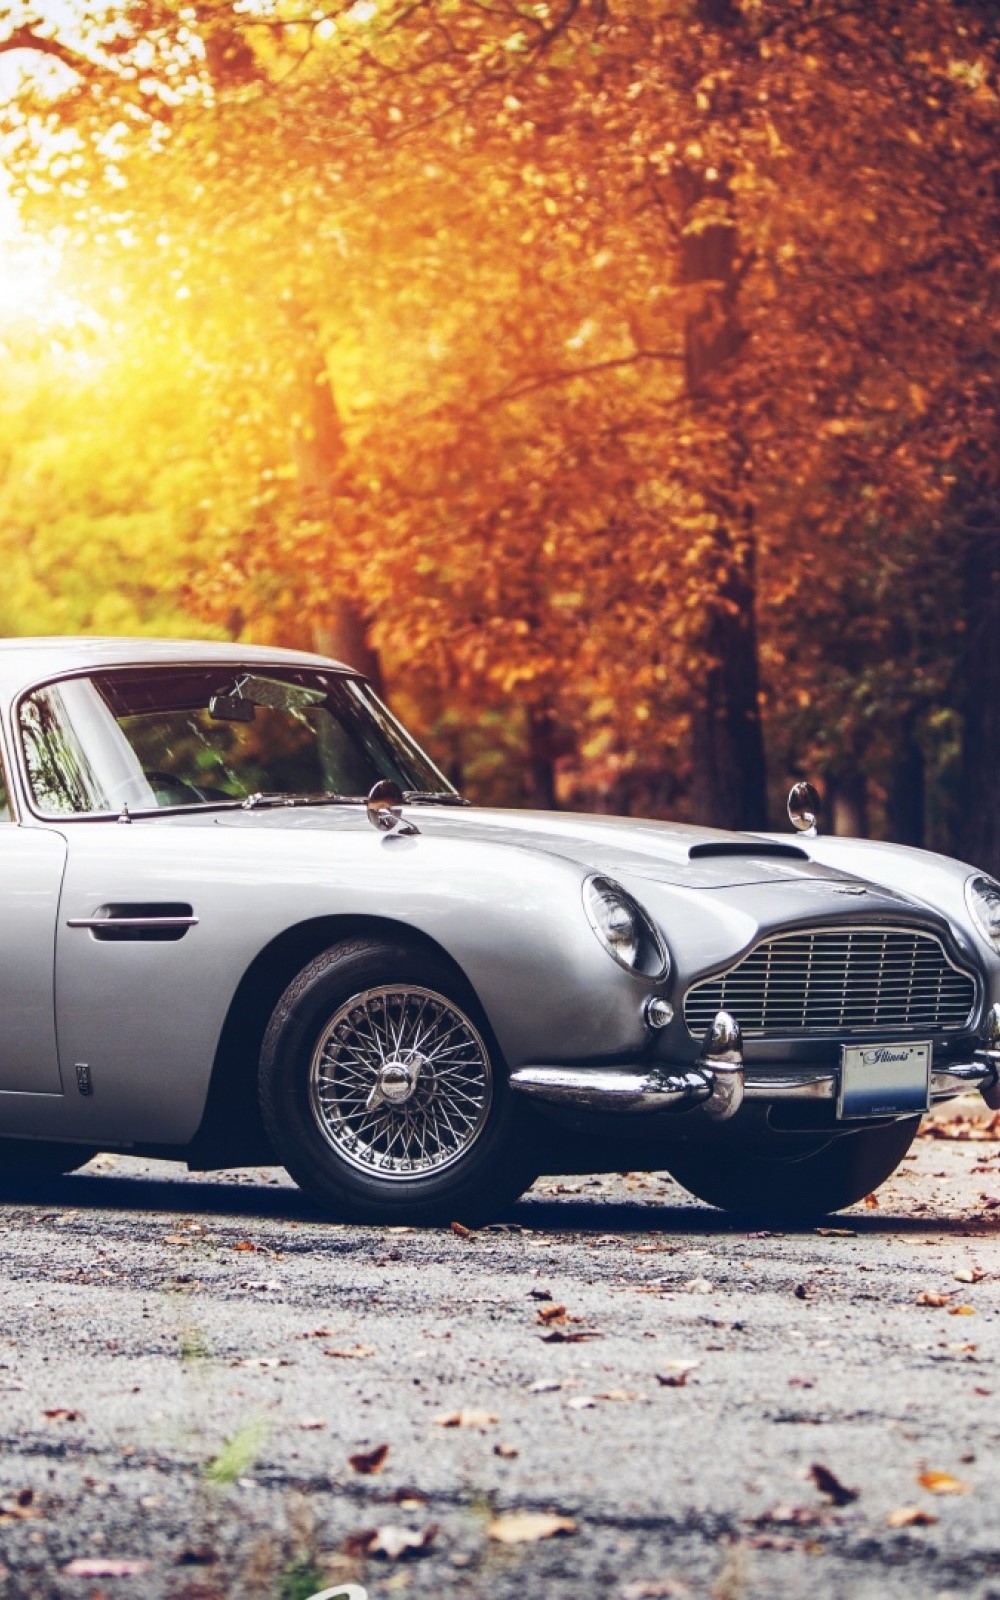 classic hd wallpapers for mobile,land vehicle,vehicle,car,classic car,aston martin db5